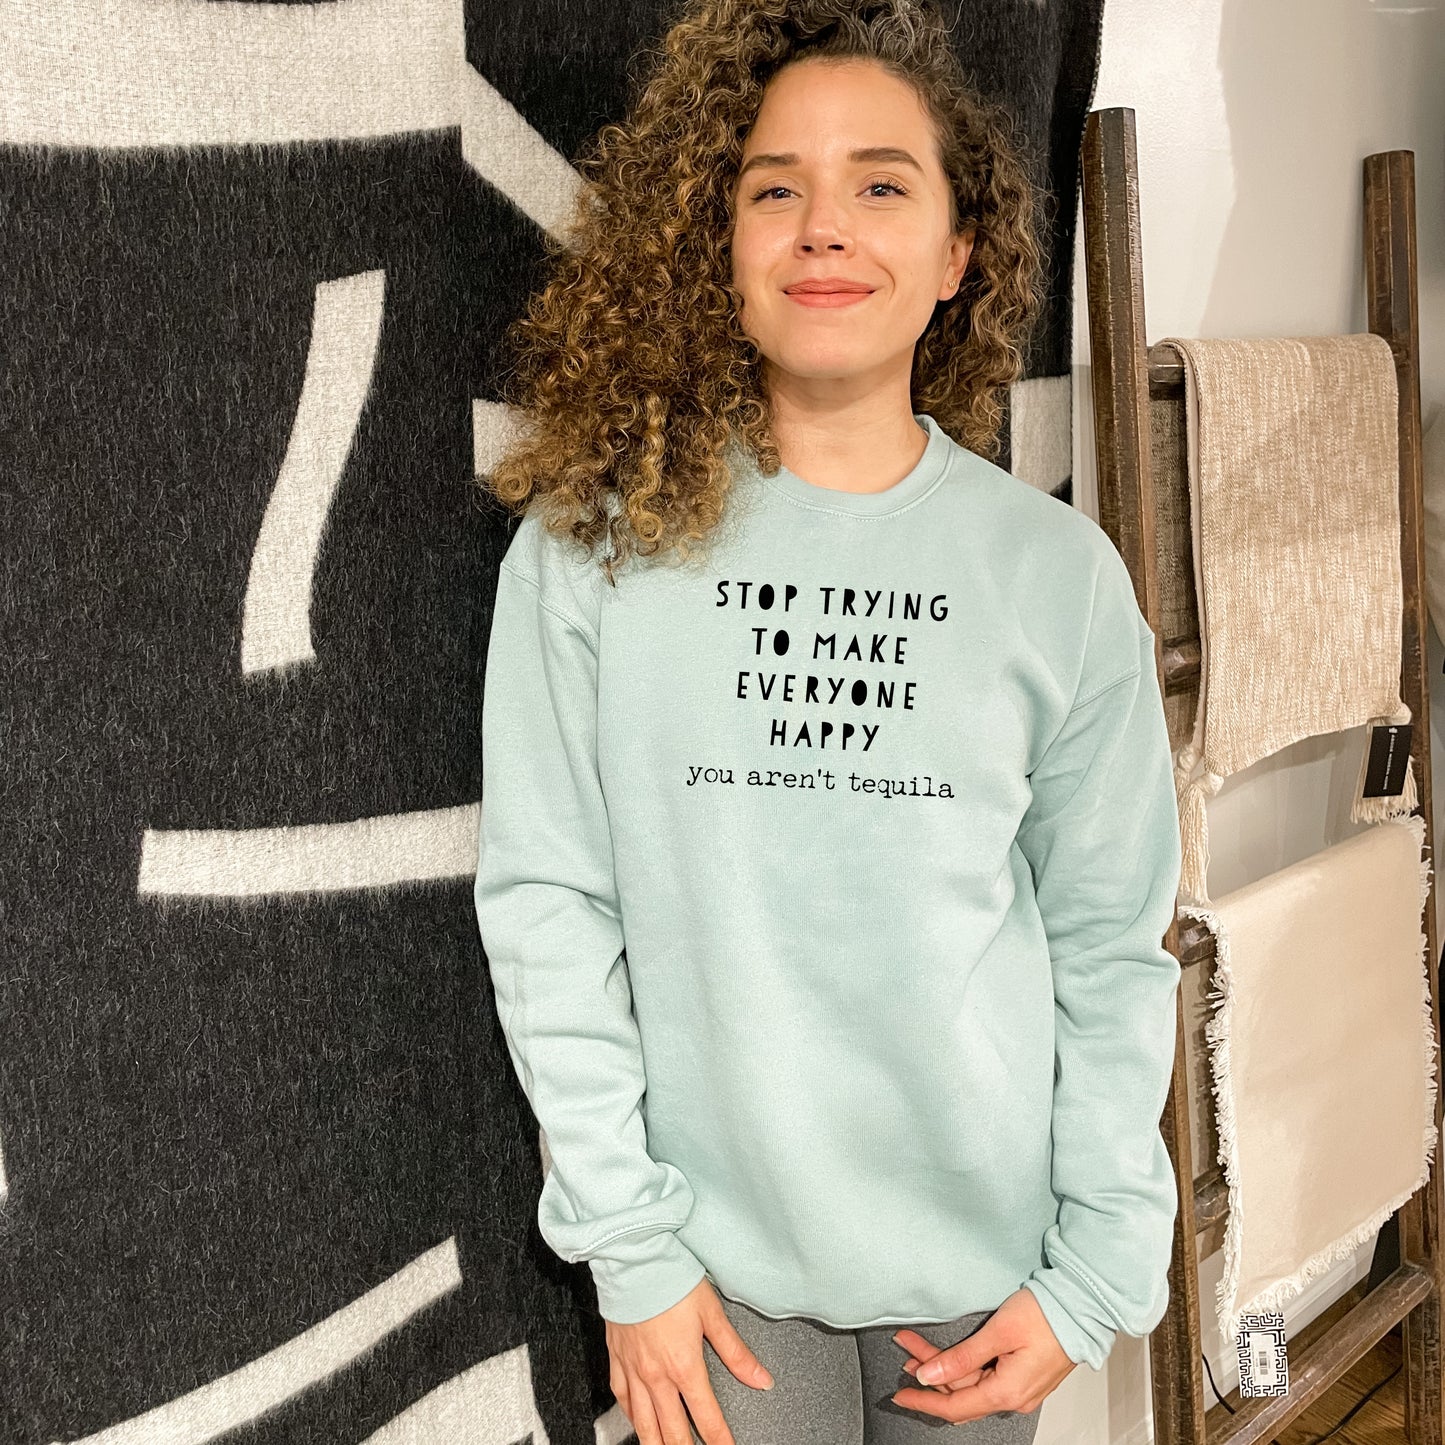 Stop Trying To Make Everyone Happy... You Aren't Tequila - Unisex Sweatshirt - Heather Gray or Dusty Blue